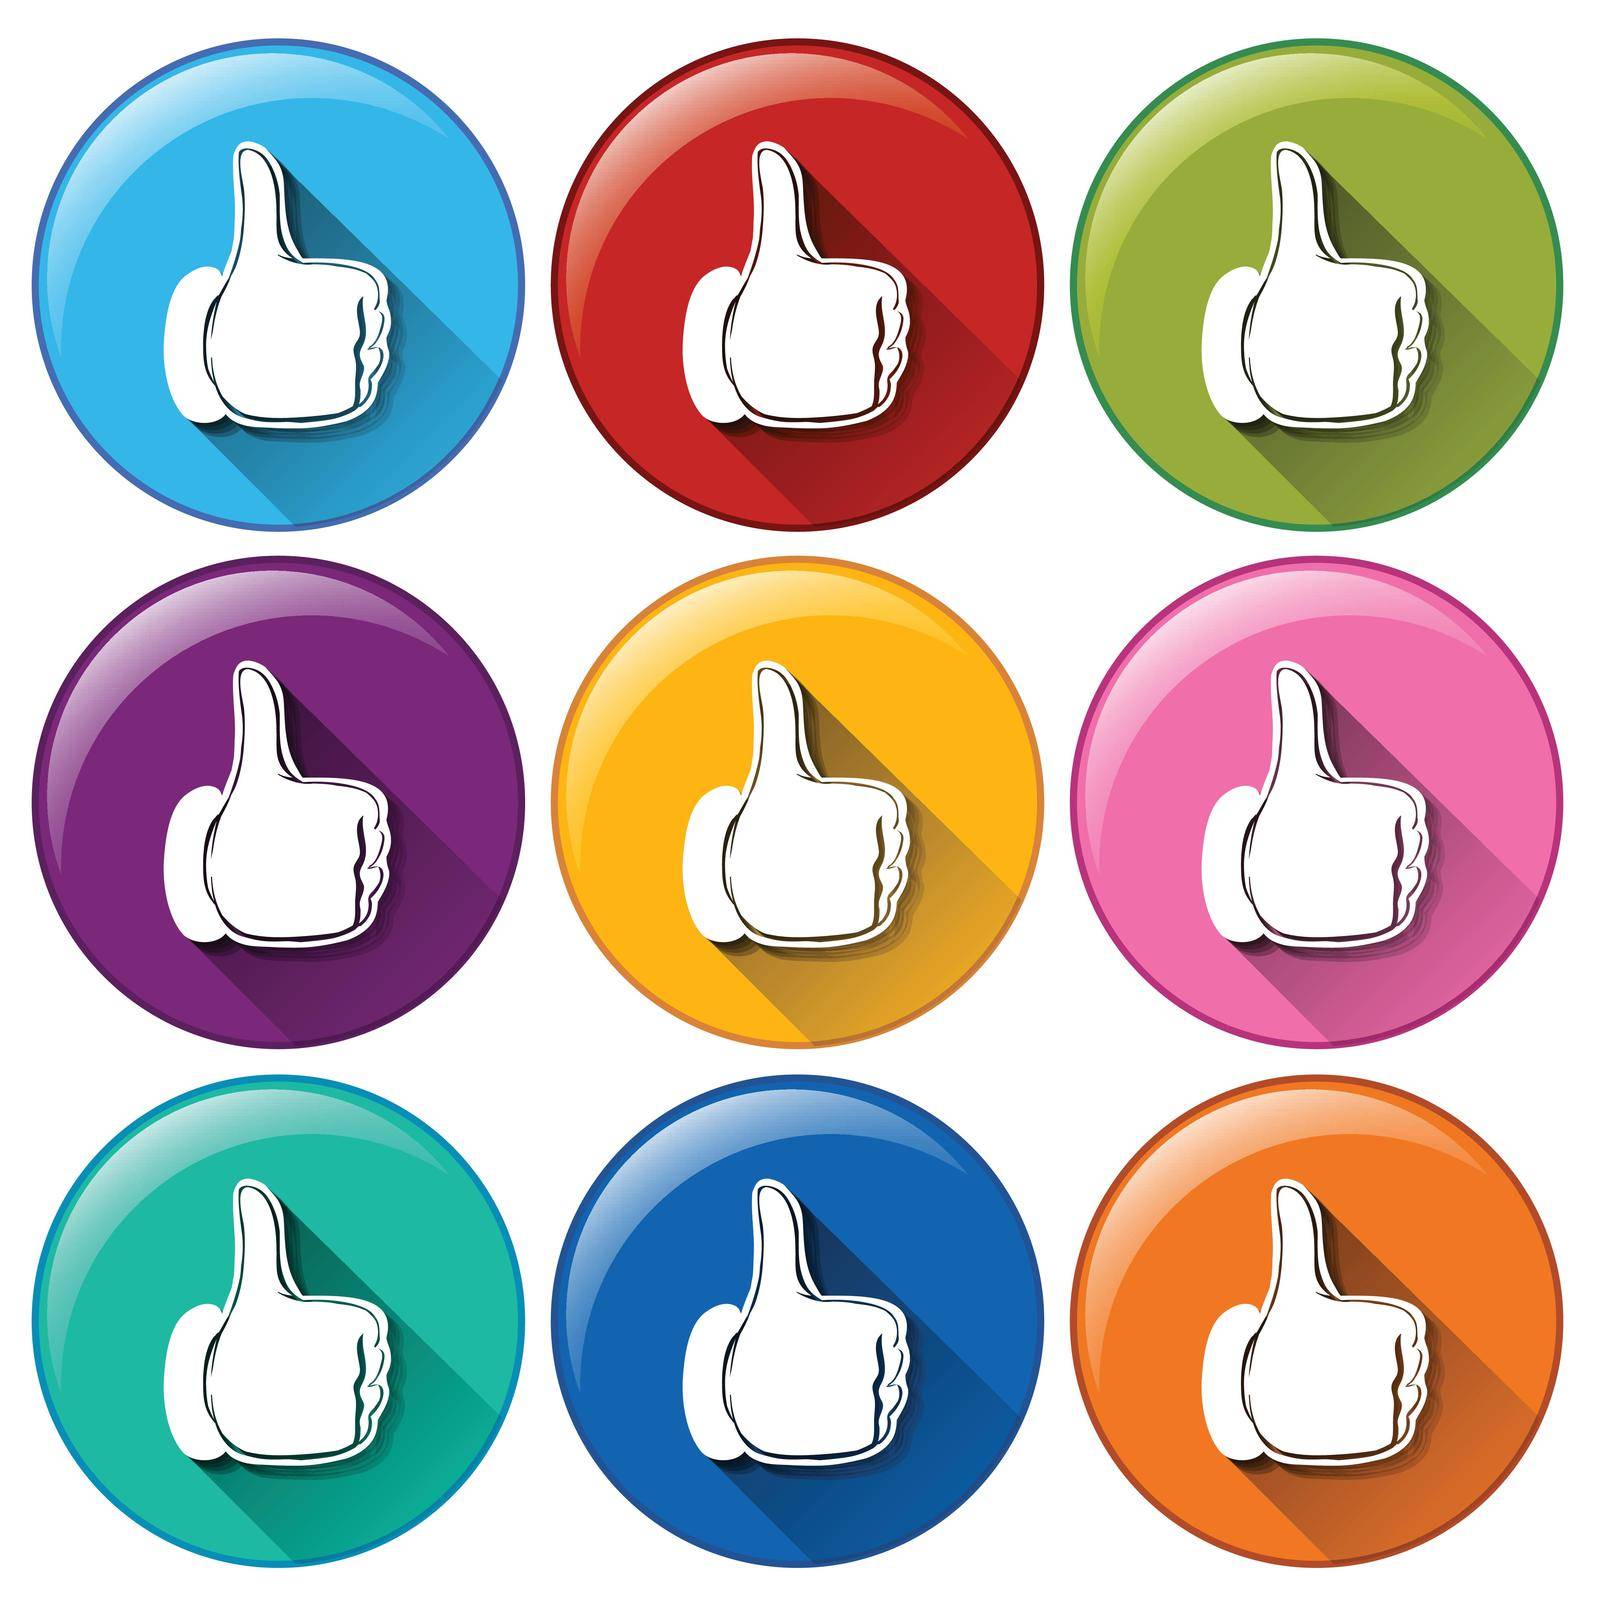 Round icons with approval sign by iimages